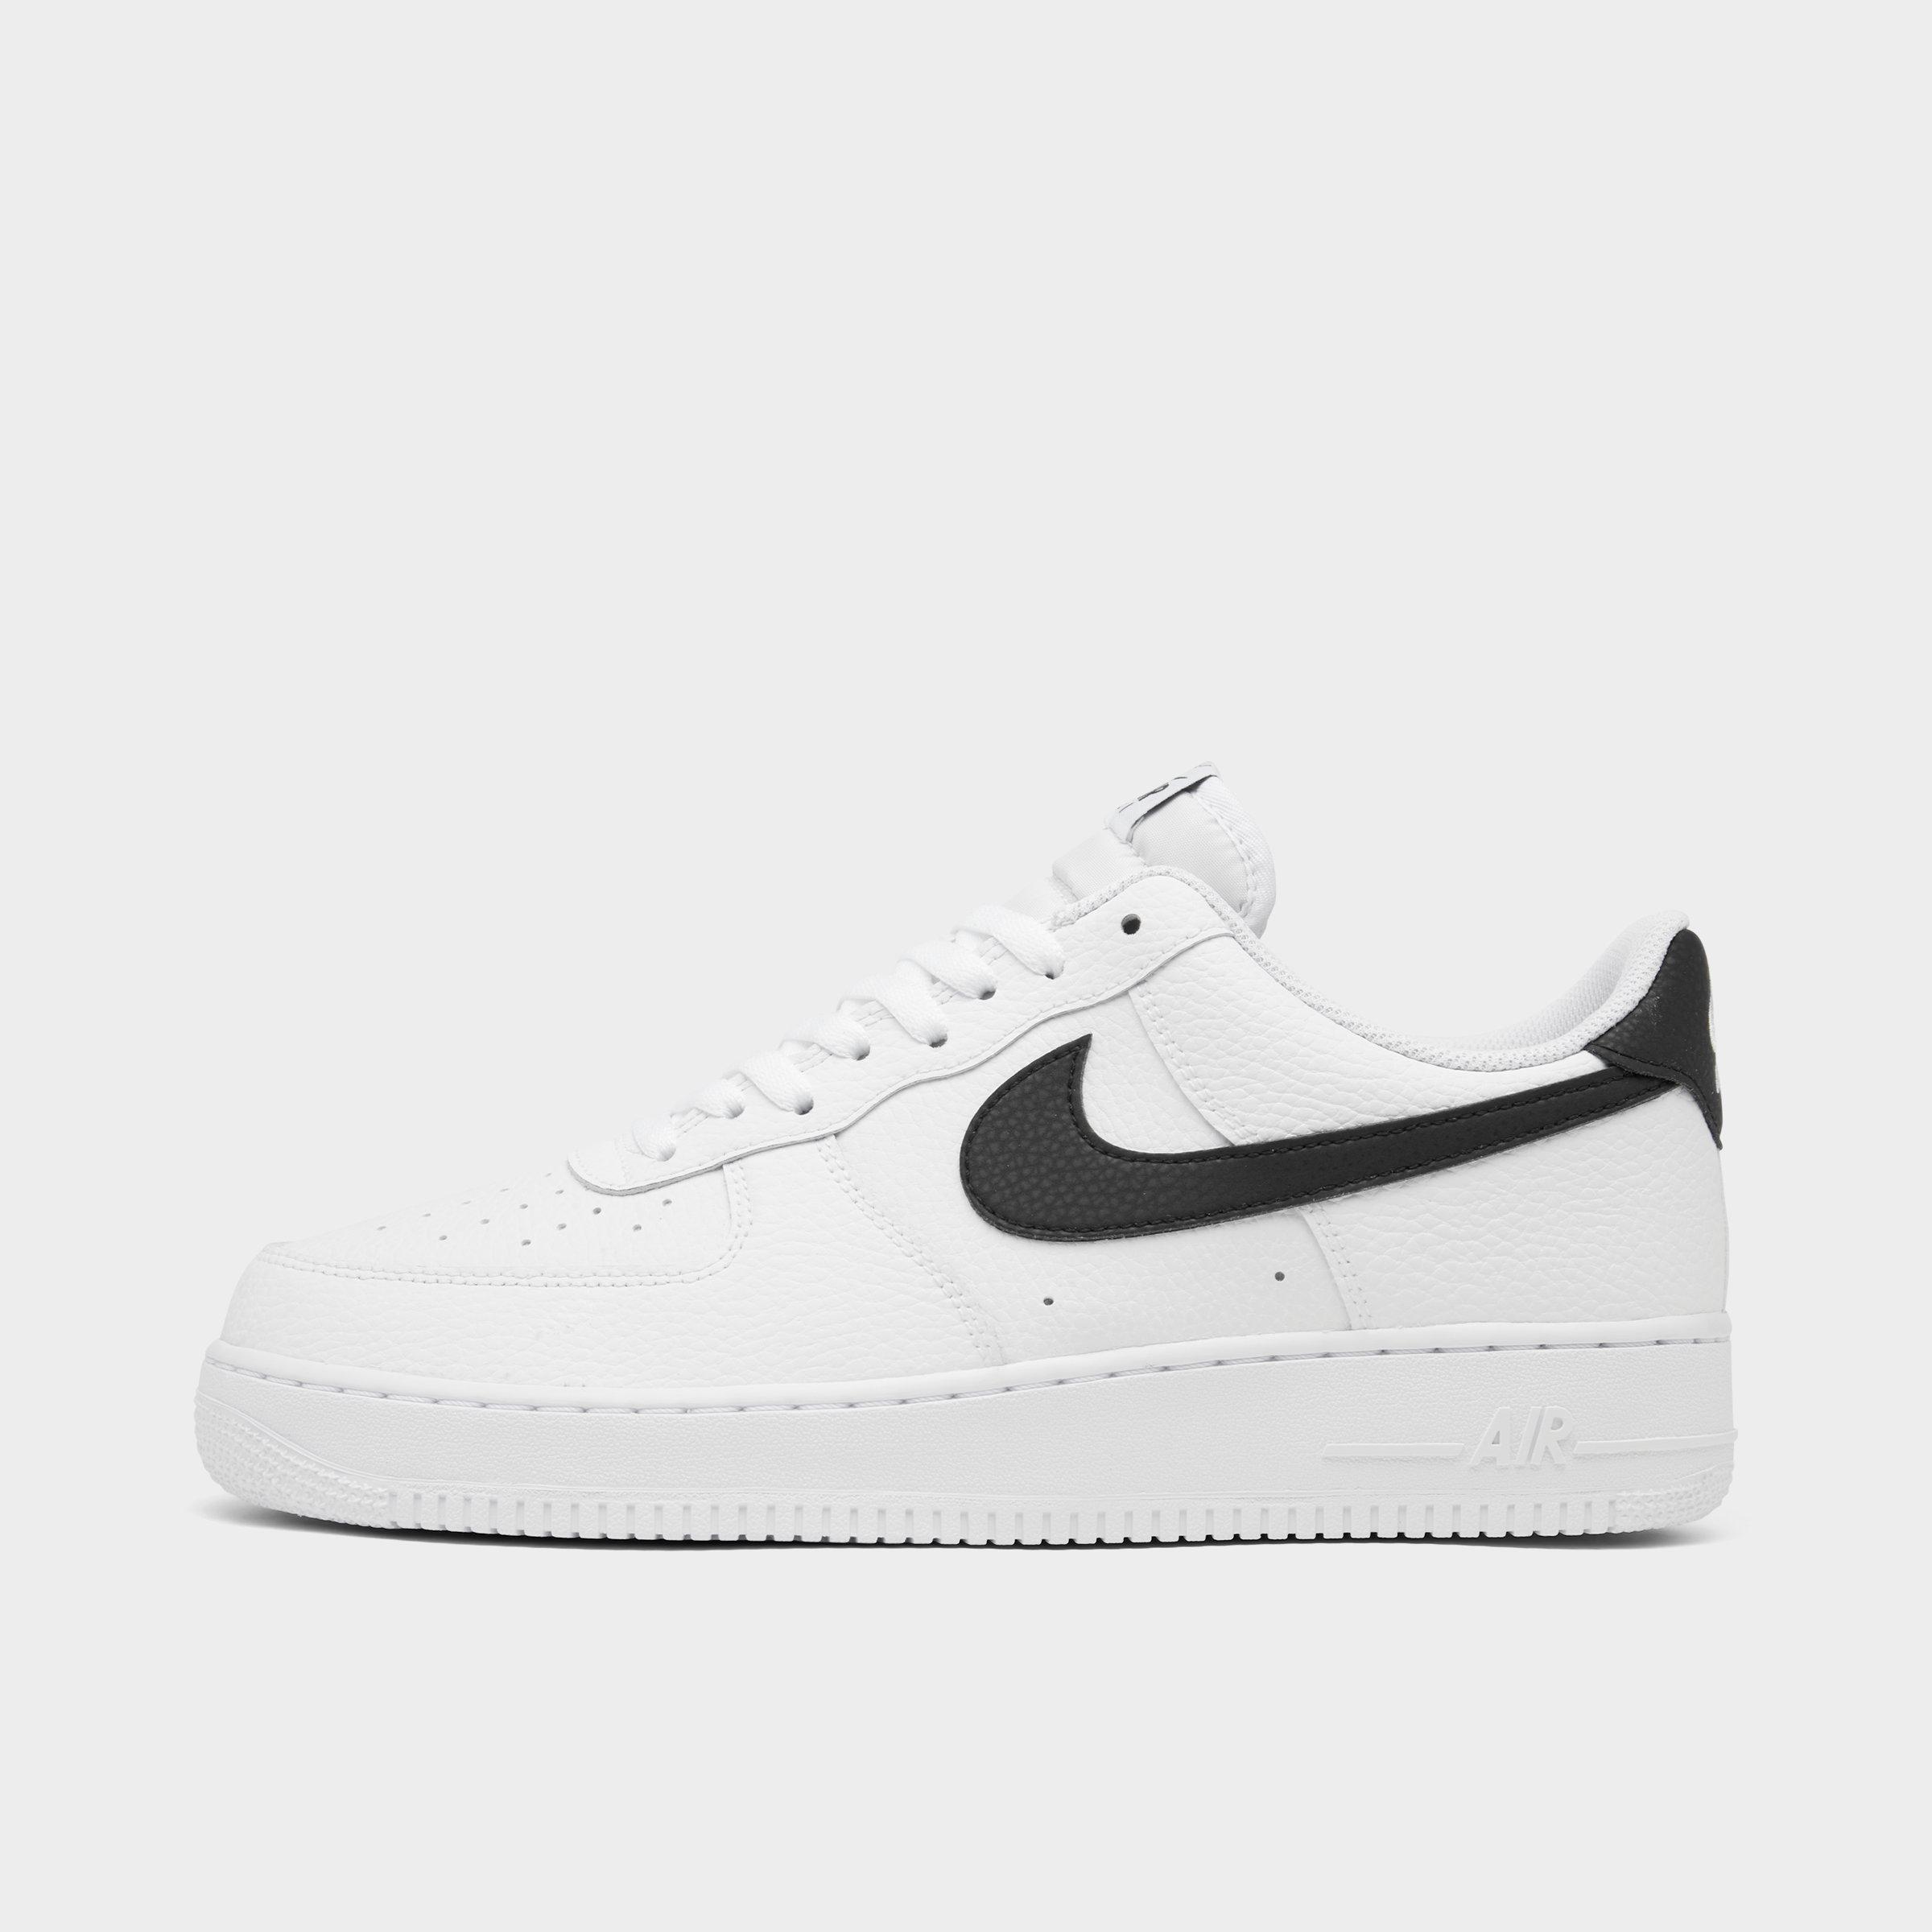 the air force 1